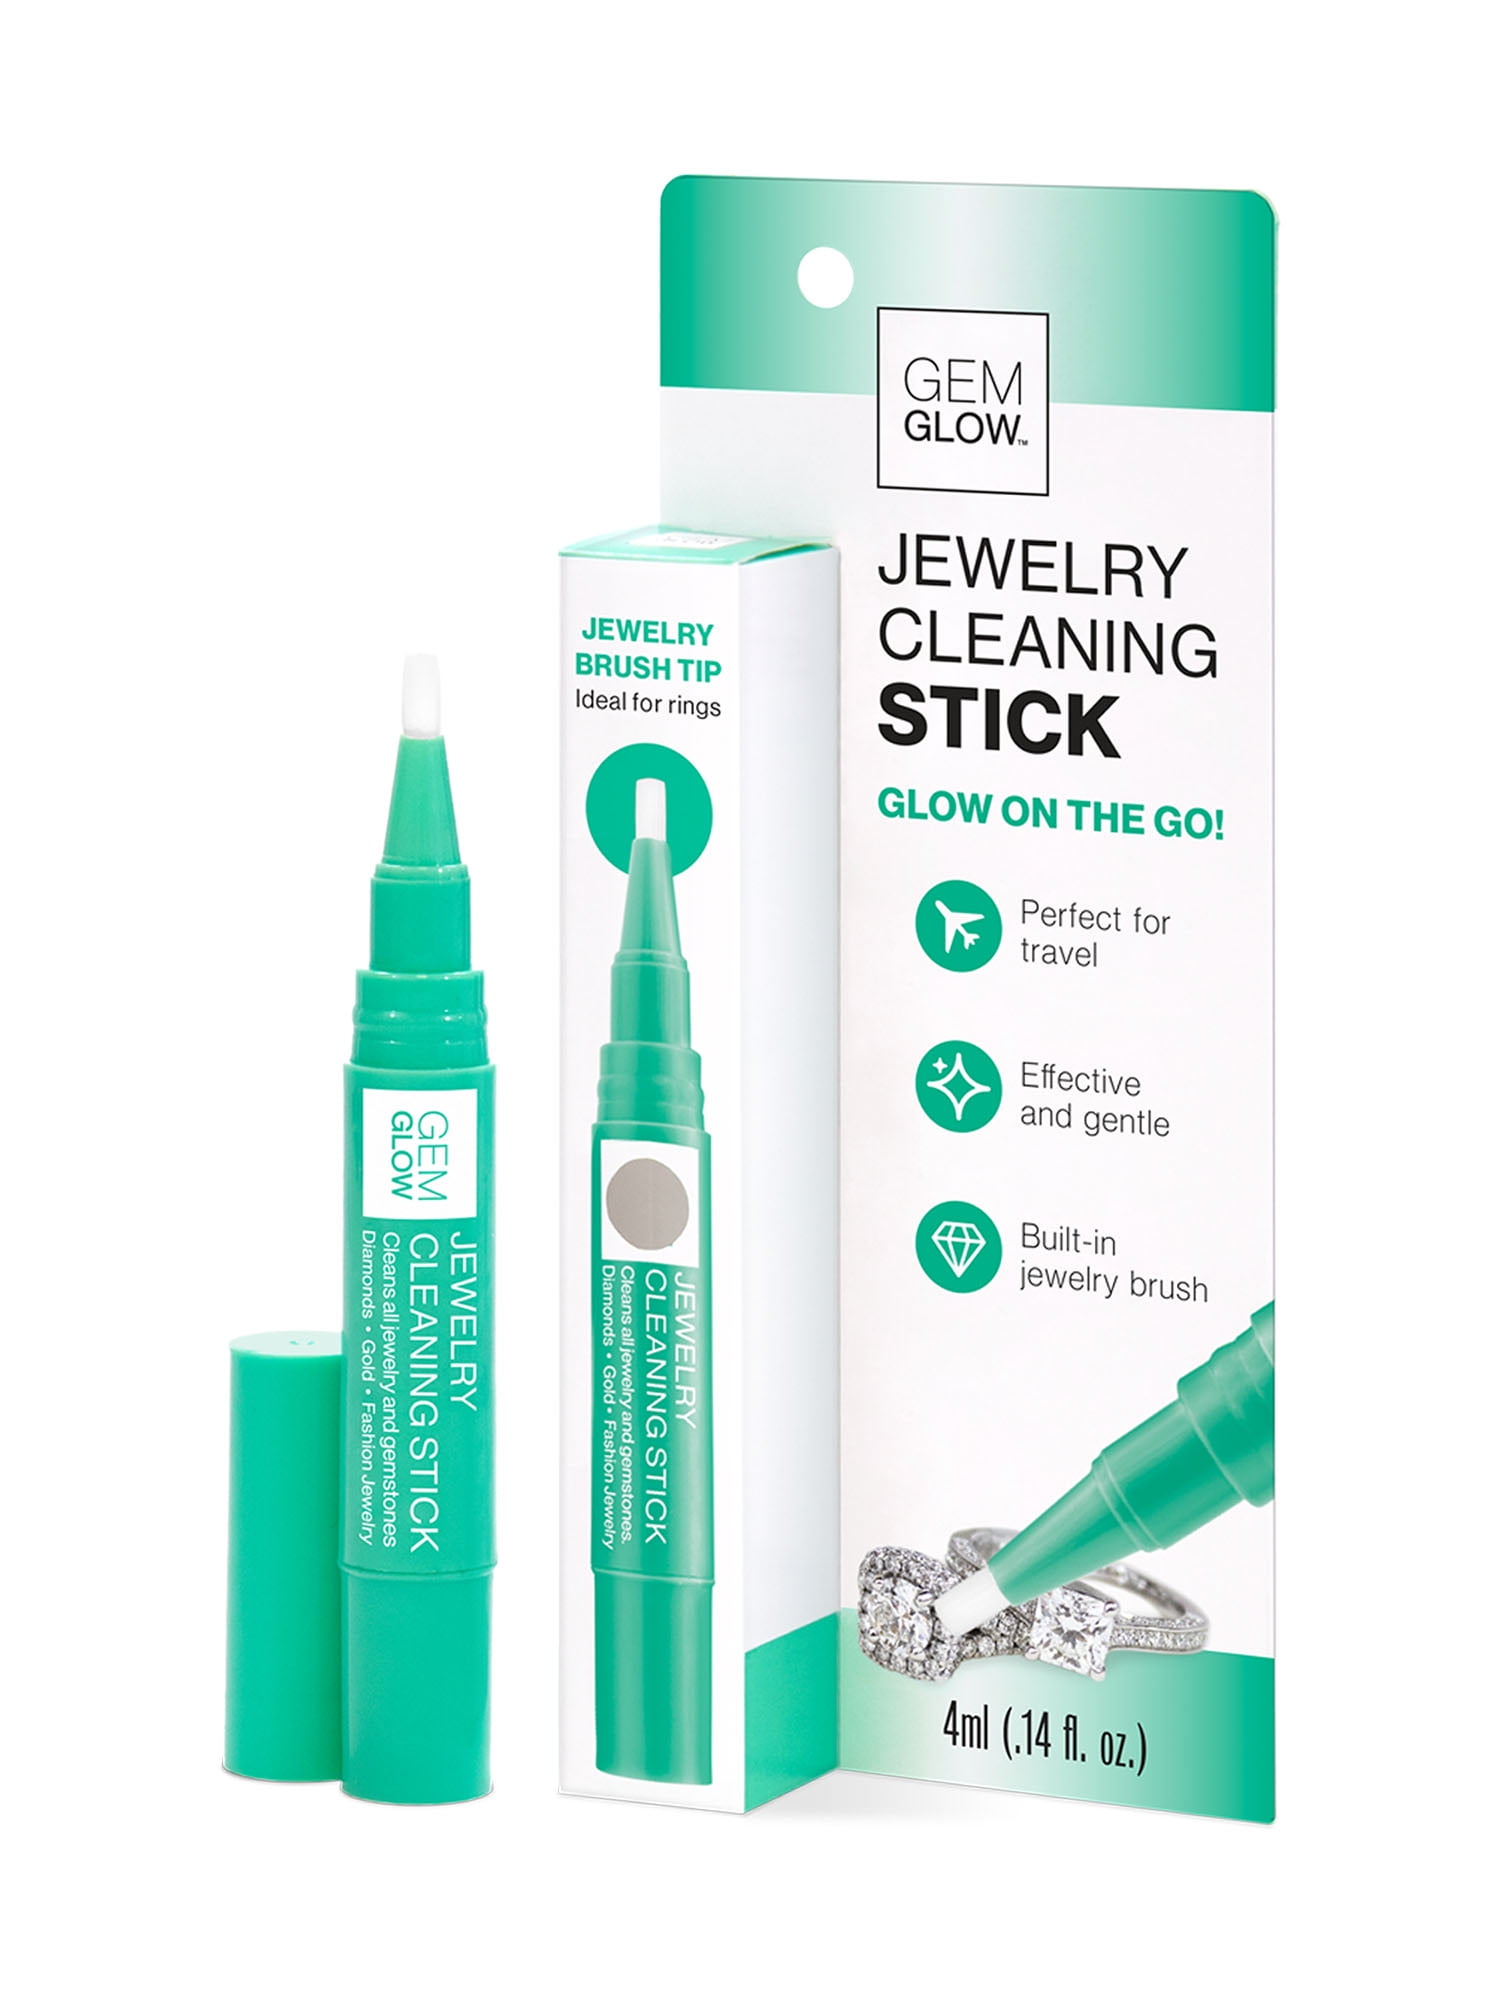 Gem Glow Jewelry Cleaning Stick for Sparkling Rings & Watches with Brush Tip